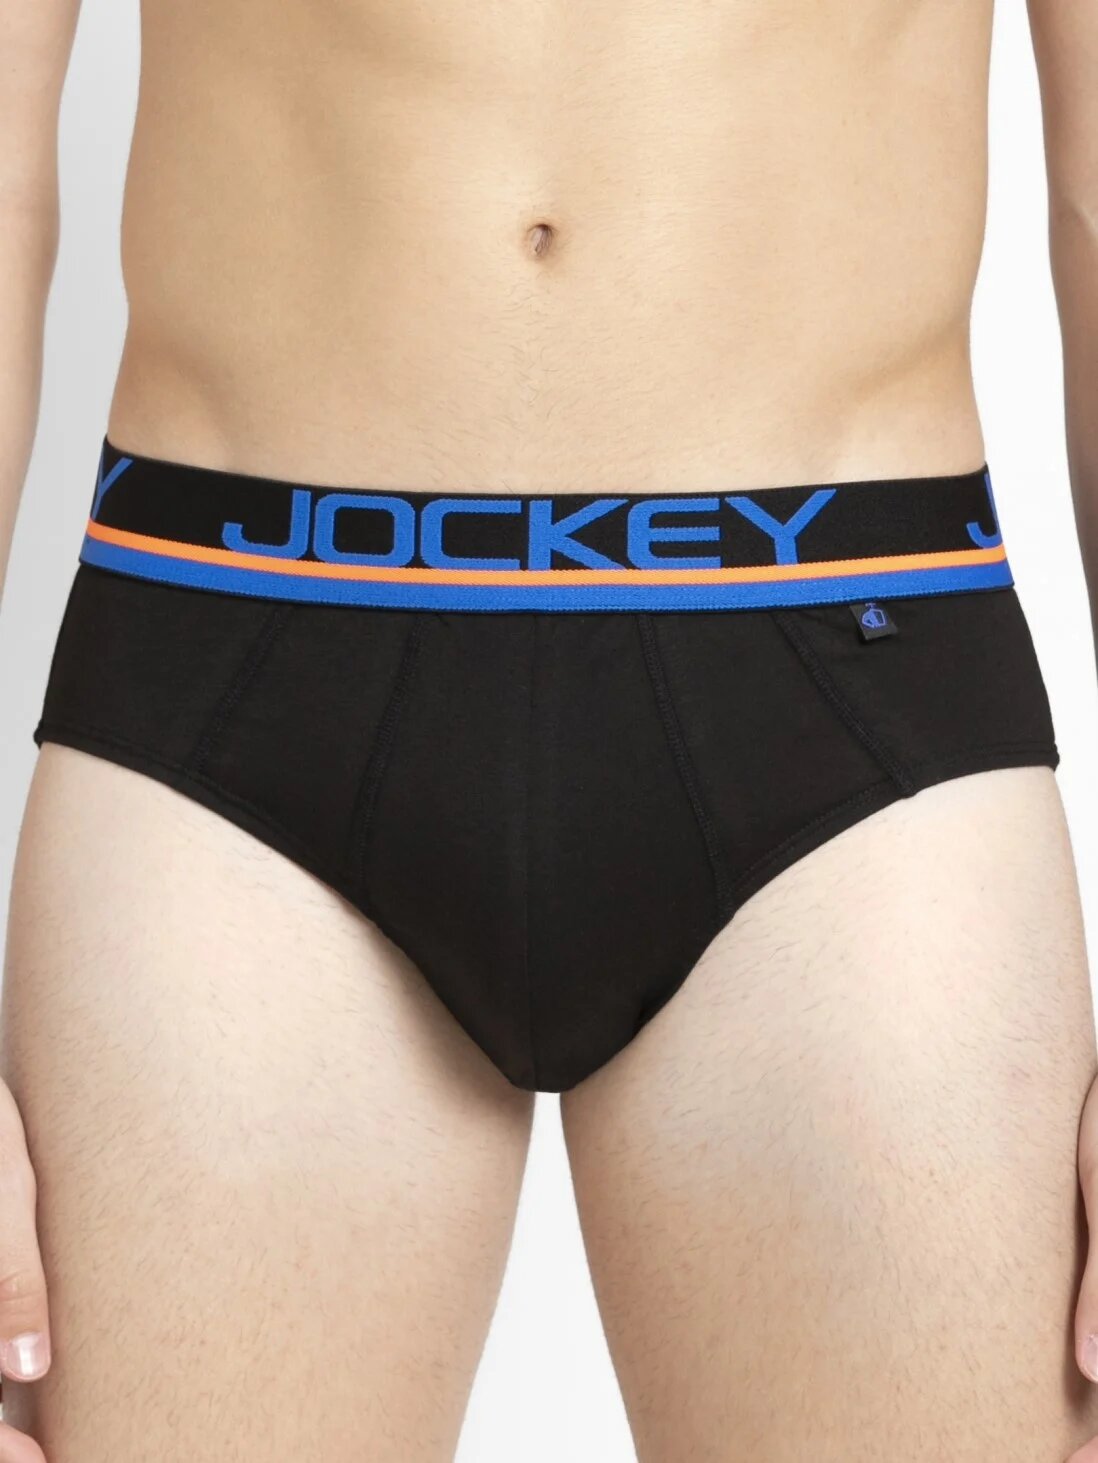 Jockey - Discover our new range of BASIC mens underwear collection